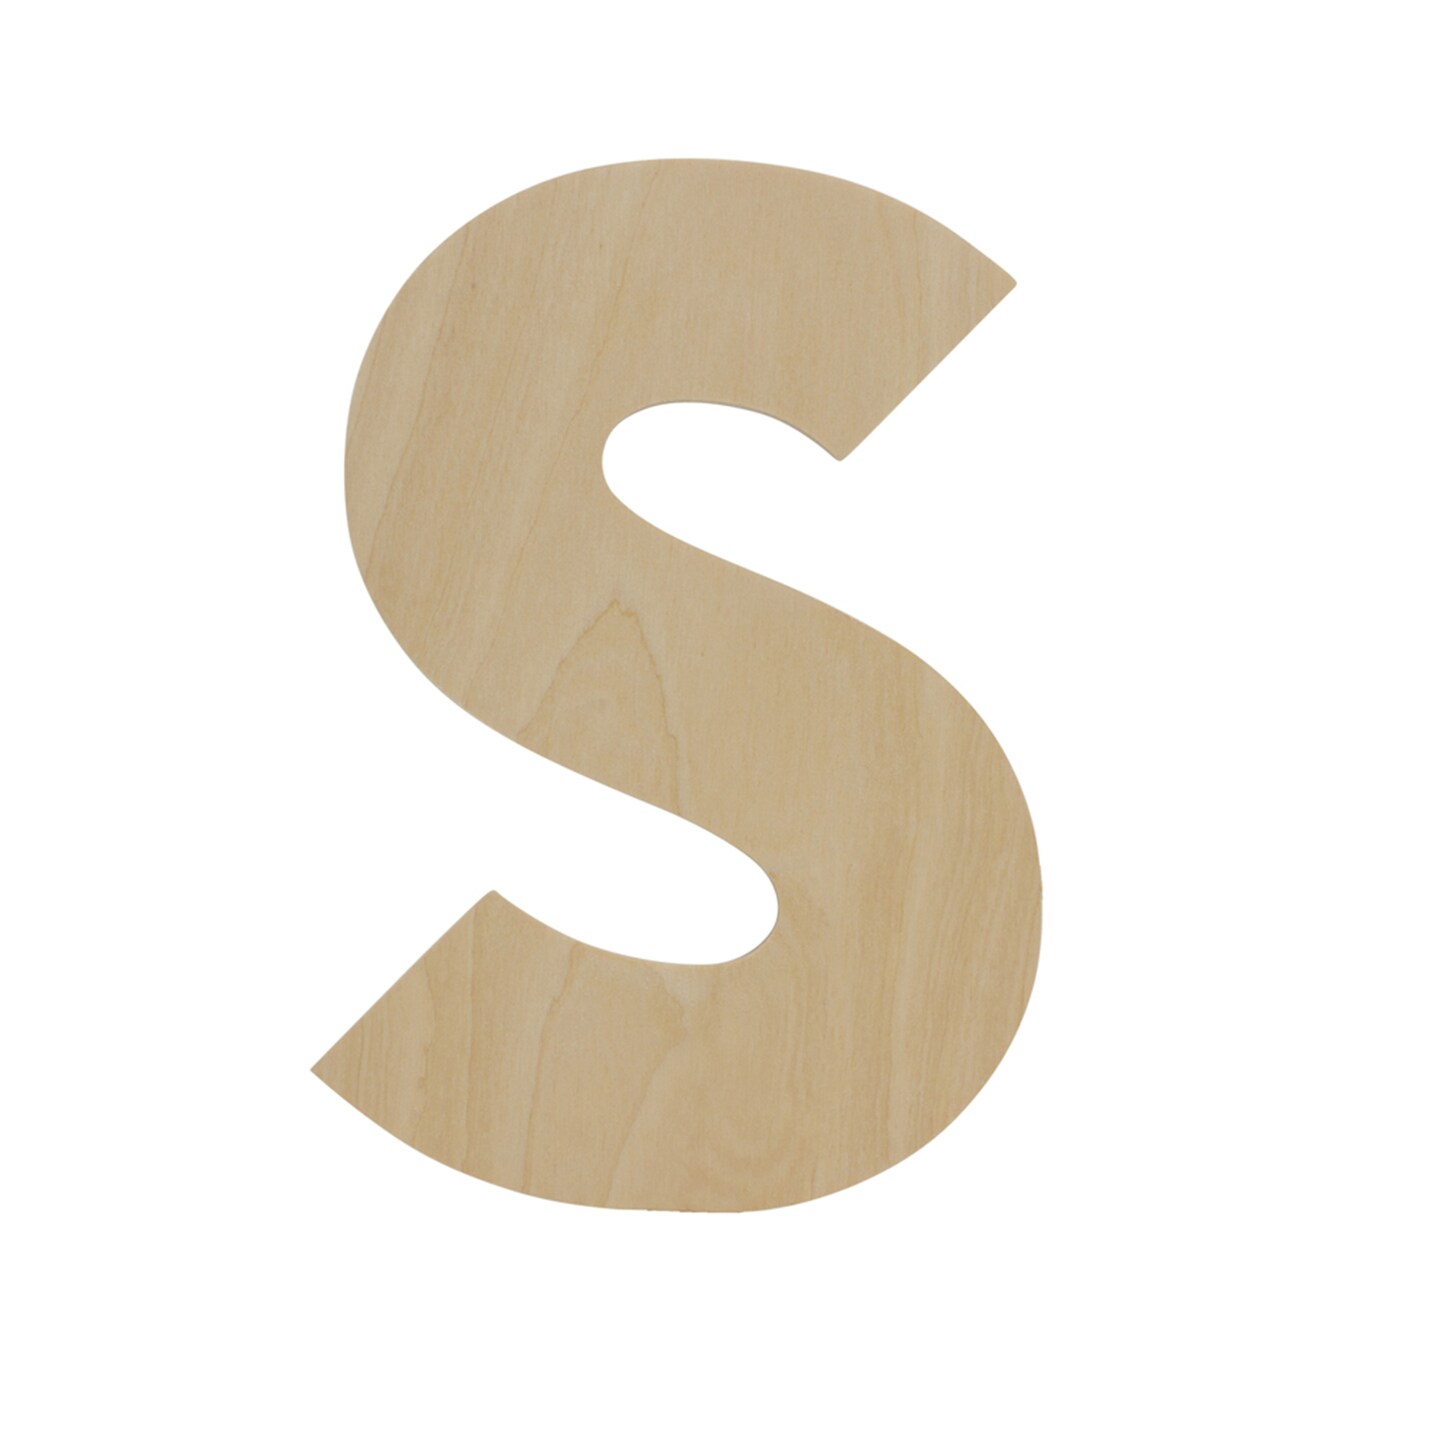 Wooden Letter S 12 inch or 8 inch, Unfinished Large Wood Letters for Crafts | Woodpeckers